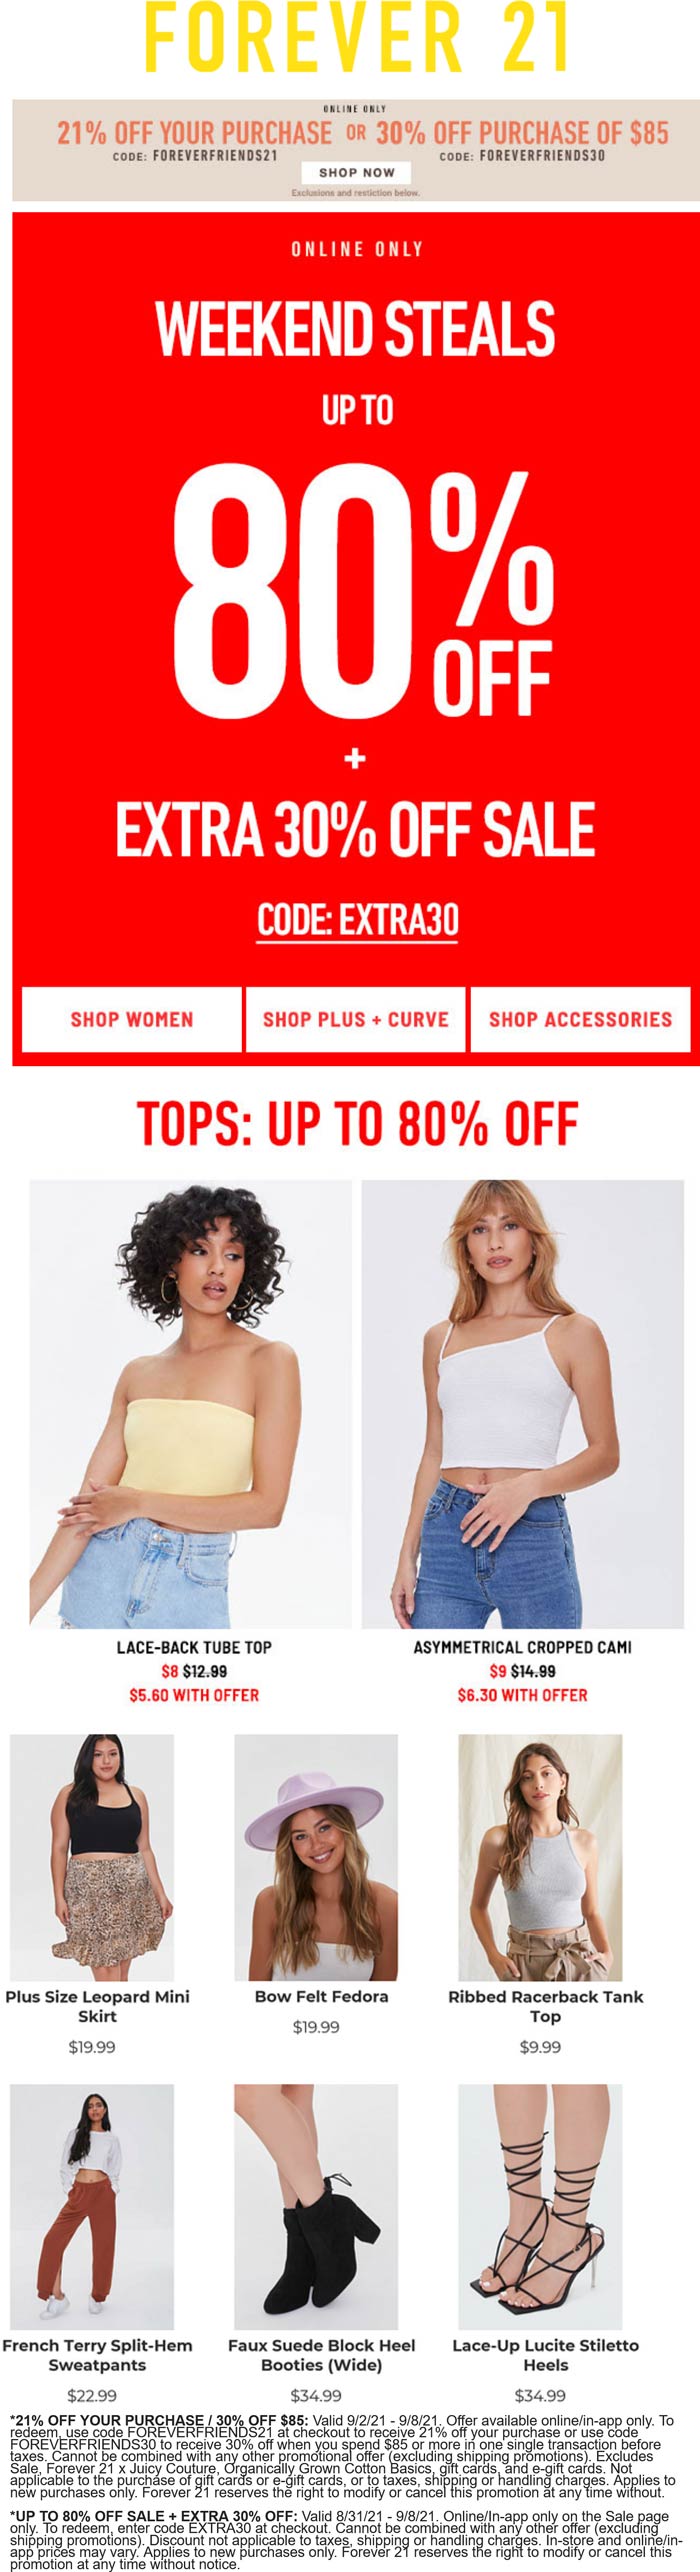 Forever 21 stores Coupon  21-30% off online at Forever 21 via promo code FOREVERFRIENDS21 #forever21 